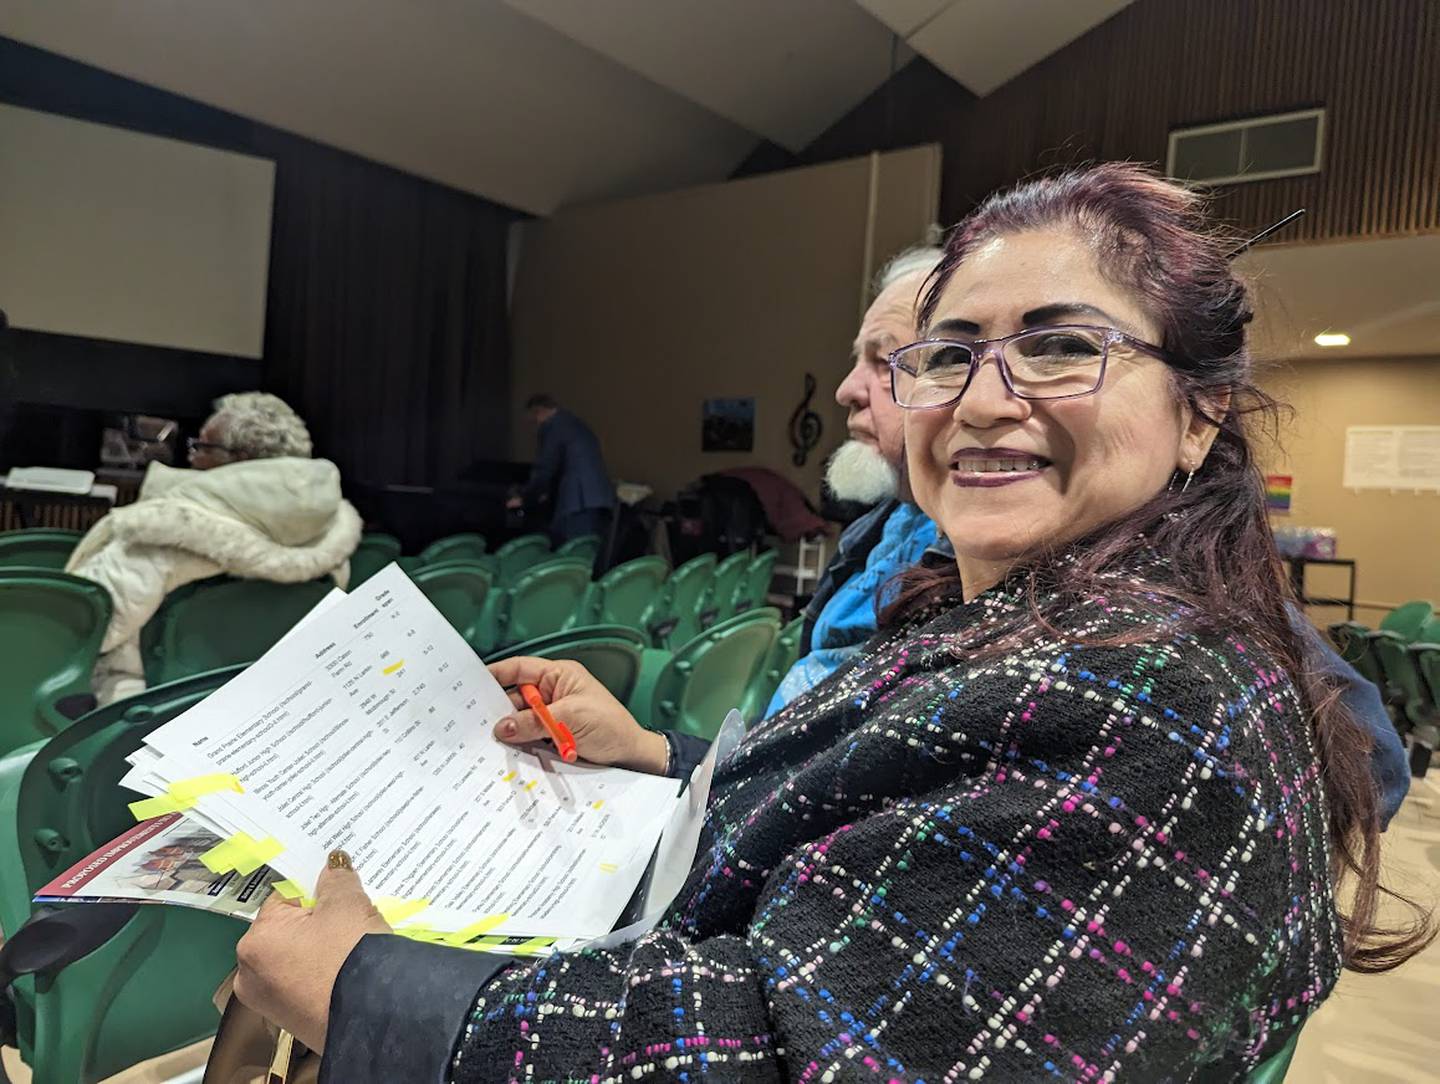 Maria A. Rosas Urbano of Joliet came to the first of two informational meetings with a thick packet of information on District 86 she'd printed from the internet. Urbano wanted to know why District 86 was rushing with putting the referendum on the ballot and why all 21 schools in the district weren't receiving the same attention. The informational meeting was held Monday, Dec. 12, 2022, at Gompers Junior High School in Joliet.